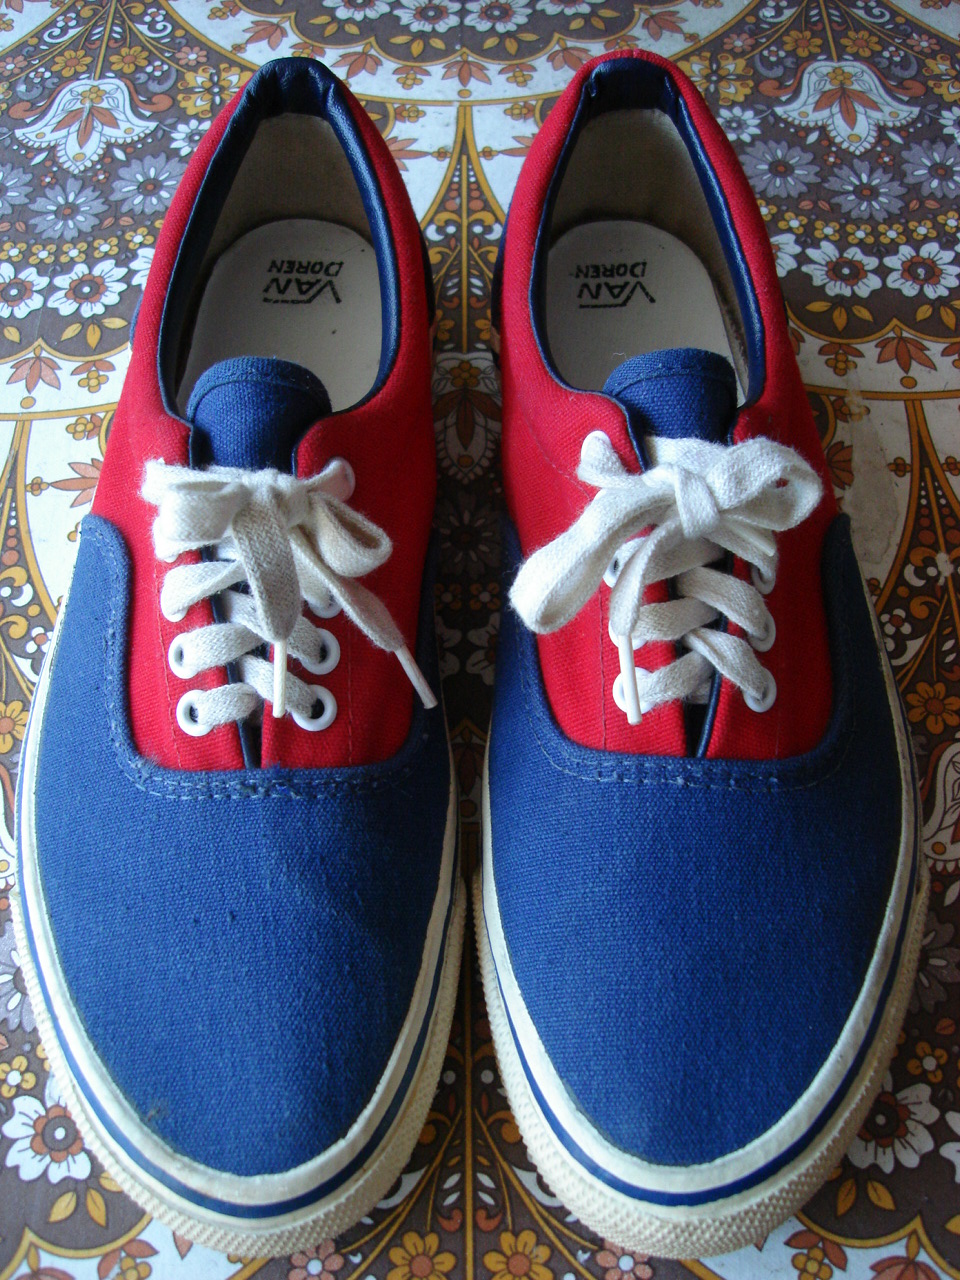 theothersideofthepillow: vintage HOLY GRAIL VANS 2-tone navy blue & red ...